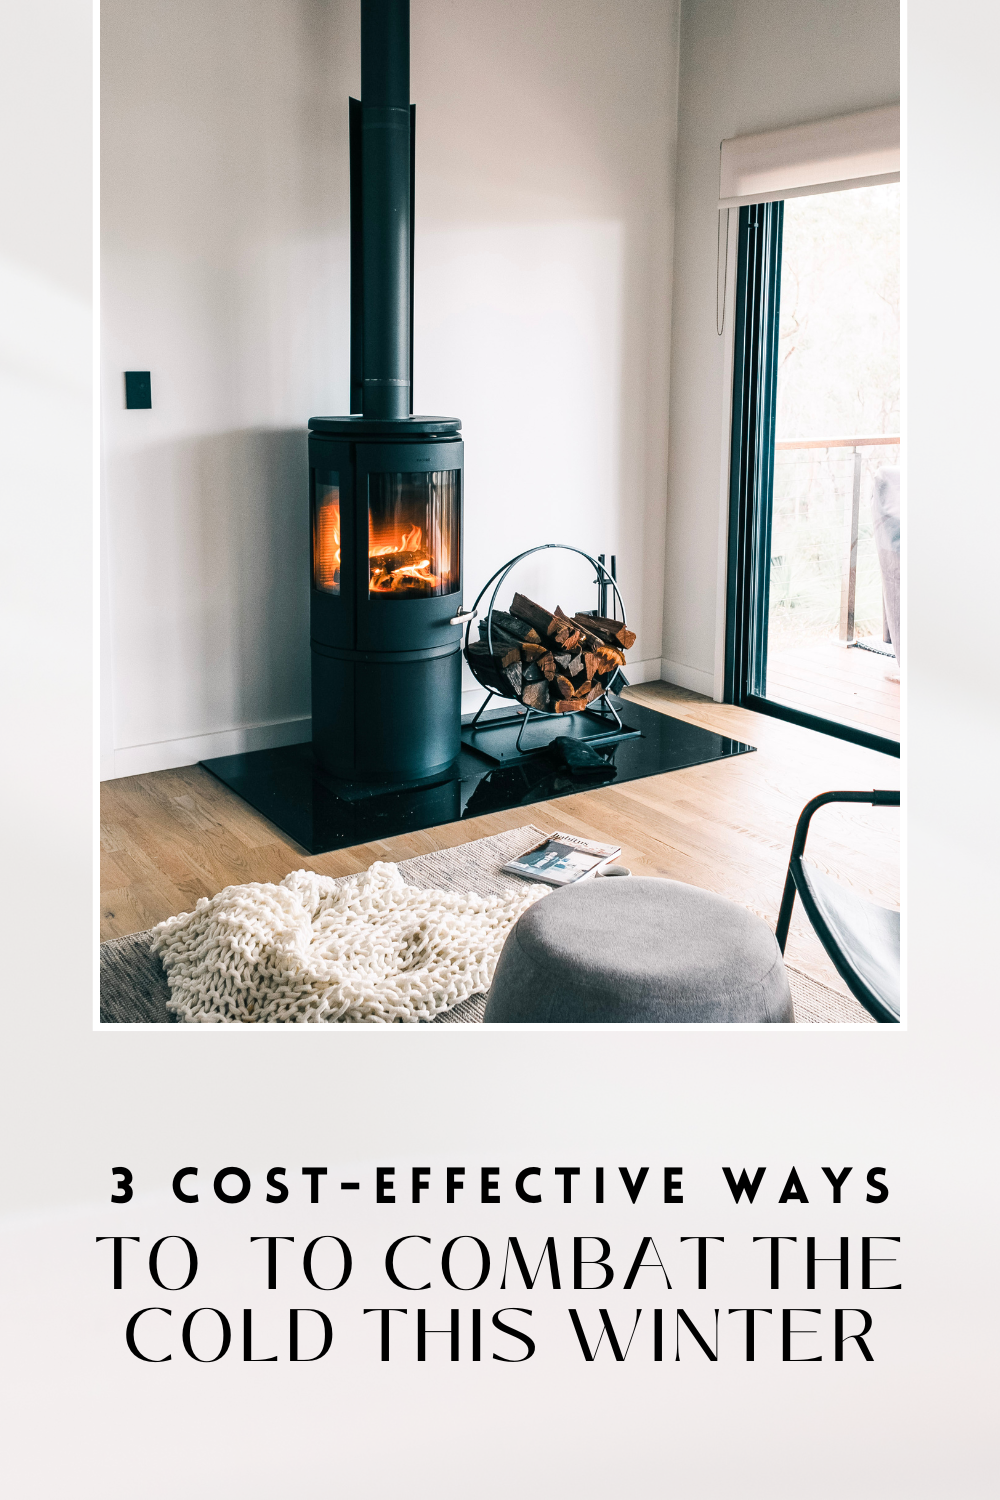 A beautiful living room is shown, it's cozy with a fireplace and plenty of blankets and a rug. This article covers 3 cost-effective ways to combat the cold this winter.